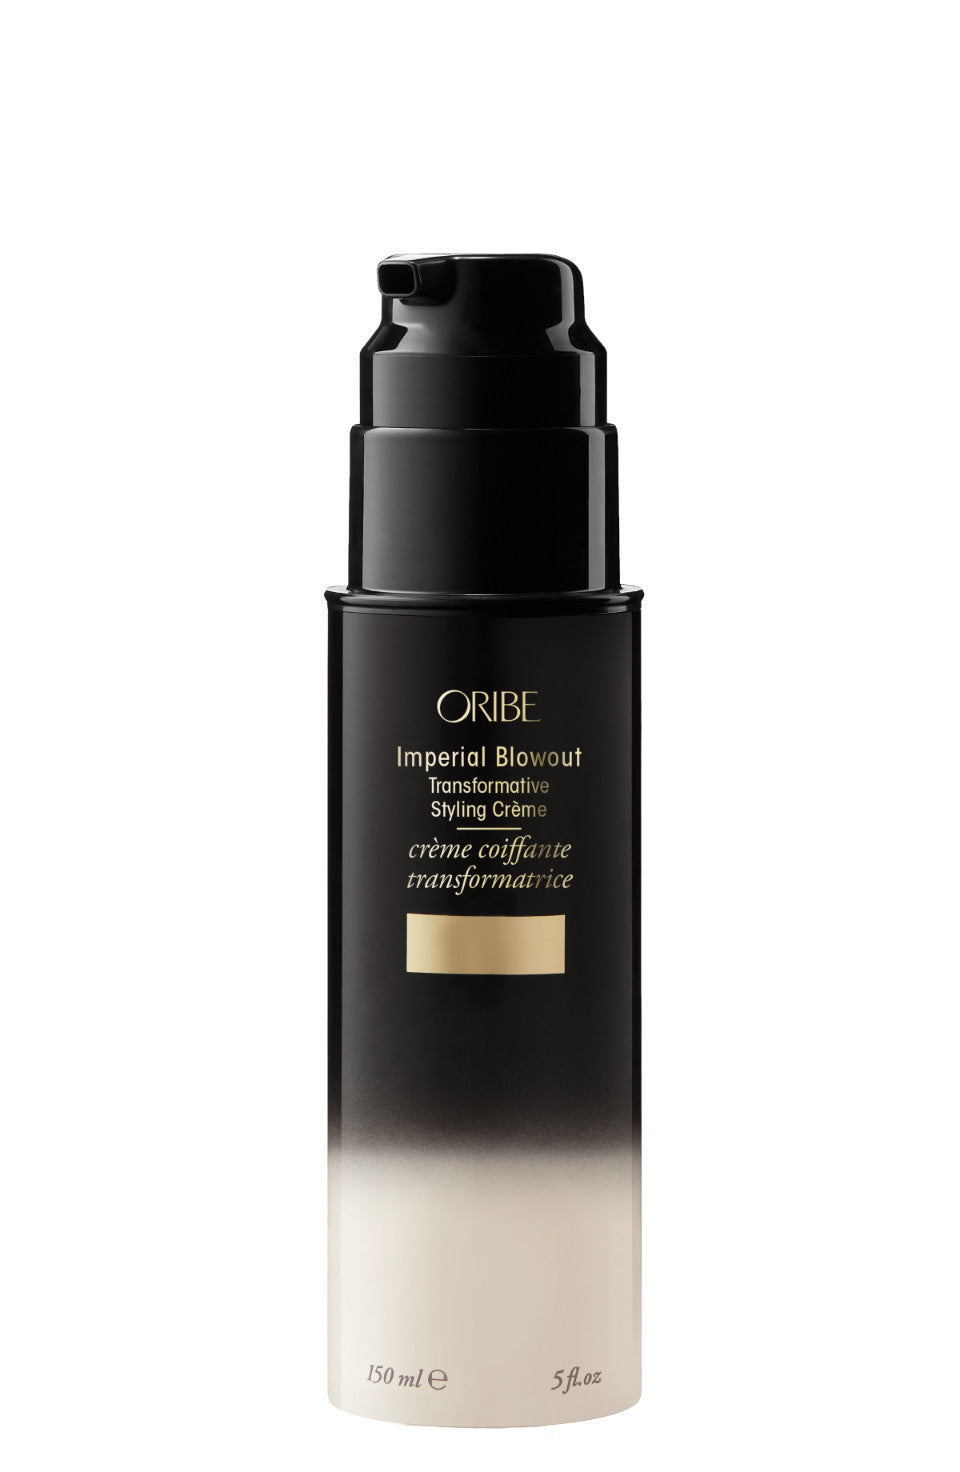 Oribe Imperial Blowout Styling Creme